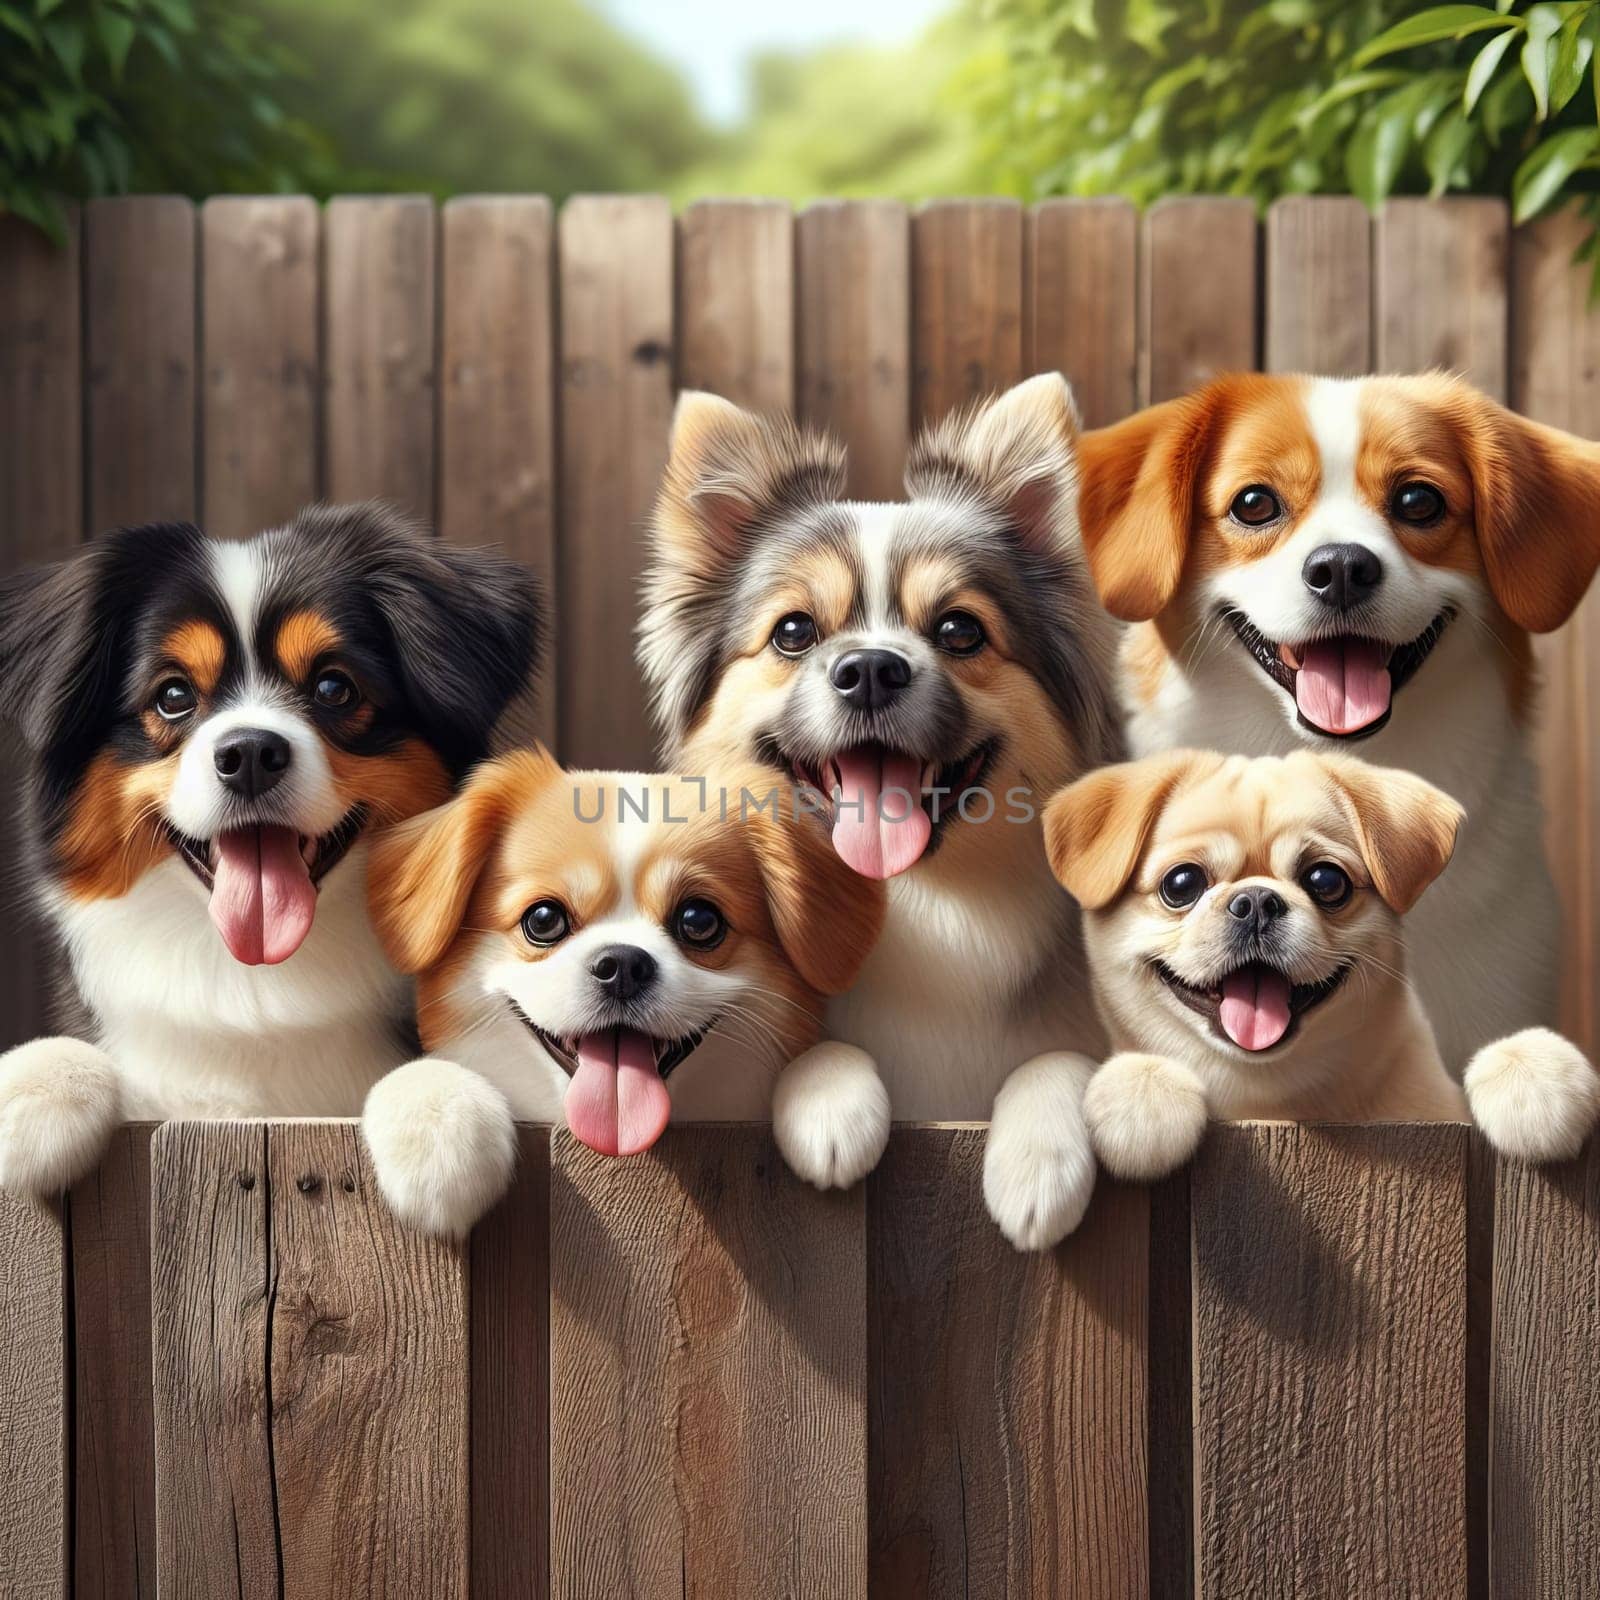 Four happy dogs peeking over a fence, surrounded by greenery, under the bright sunlight